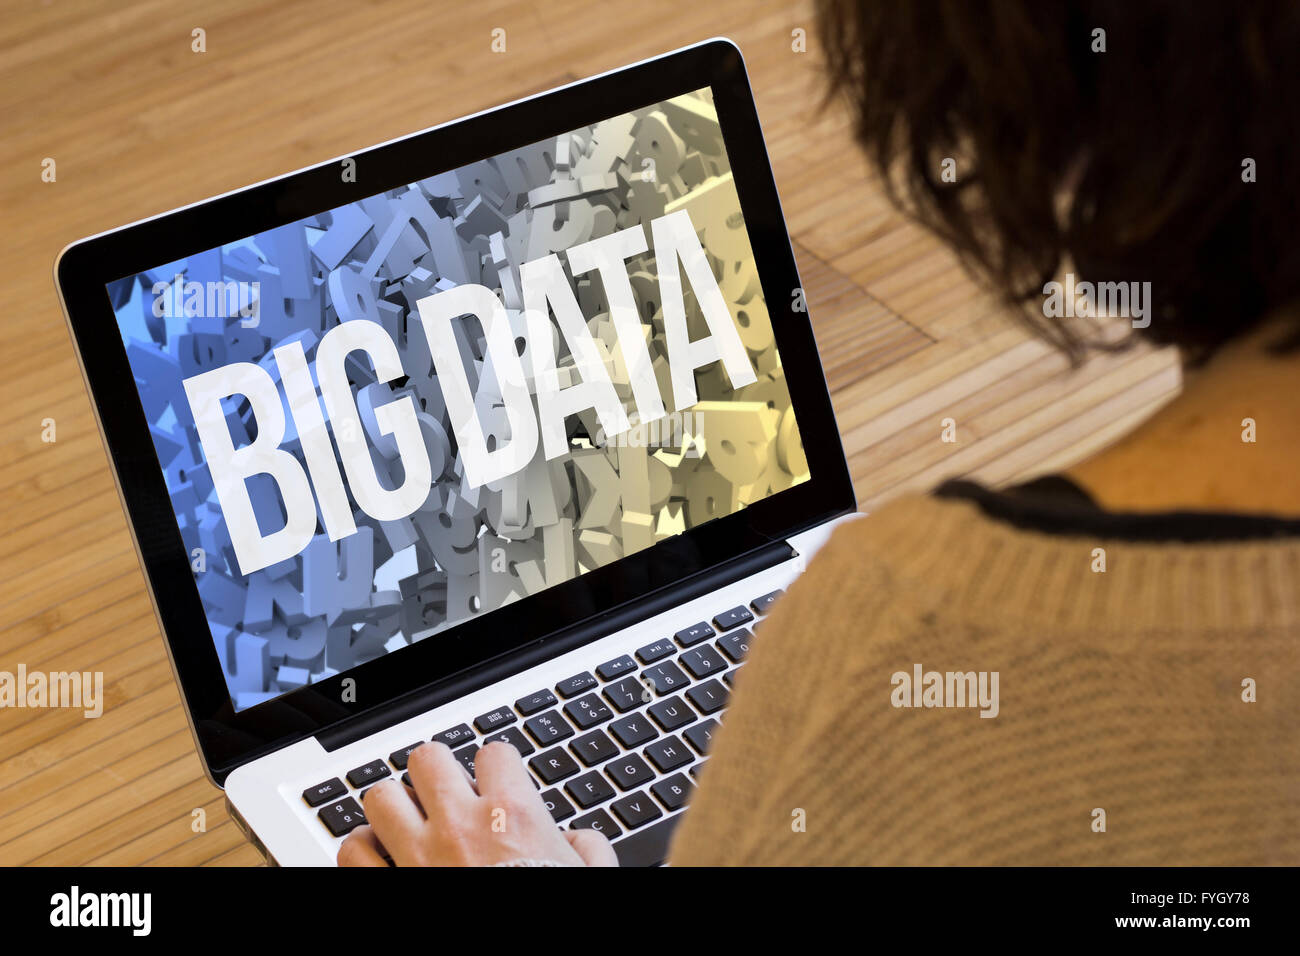 technology concept: big data on a laptop screen. Screen graphics are made up. Stock Photo